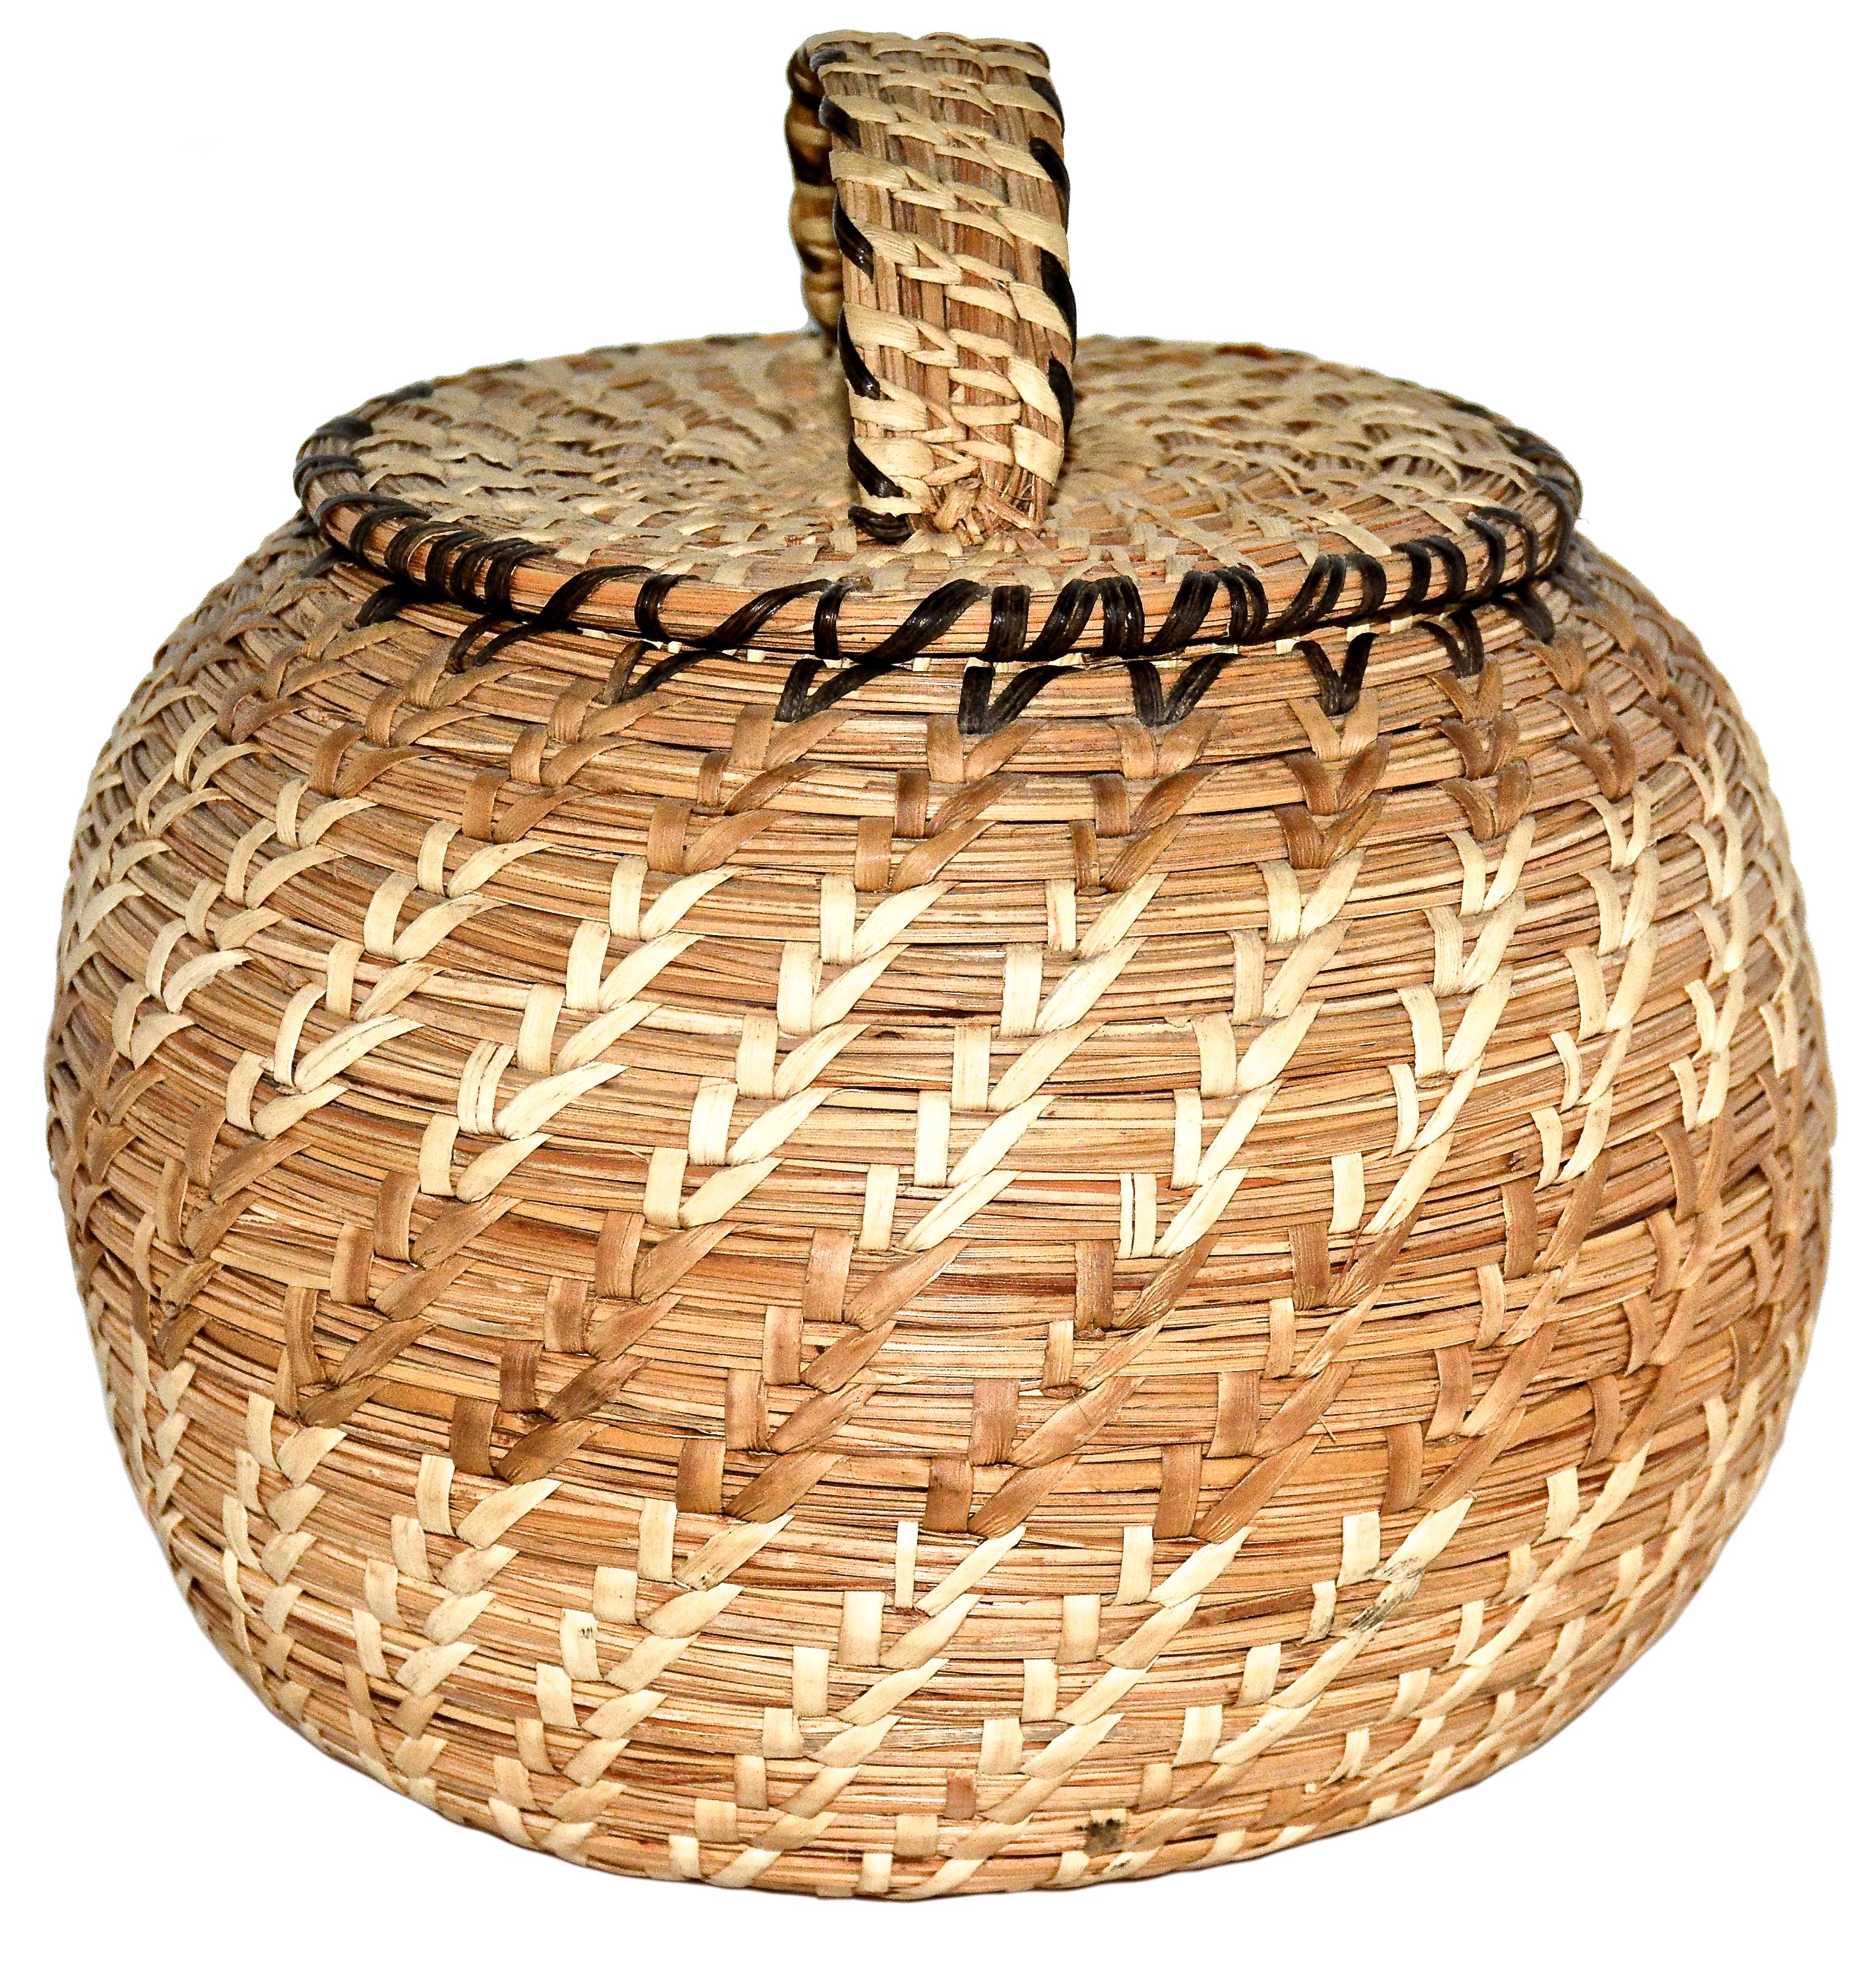 Coiled lidded grass basket
Eskimo
Tununak, Alaska
Beach grass
1960s
Measures: 7 inches Height. x 4 inches in Diameter

This is a vintage Eskimo basket from Tununak, Alaska and was made in the 1960s.

Far to the west along the shores of